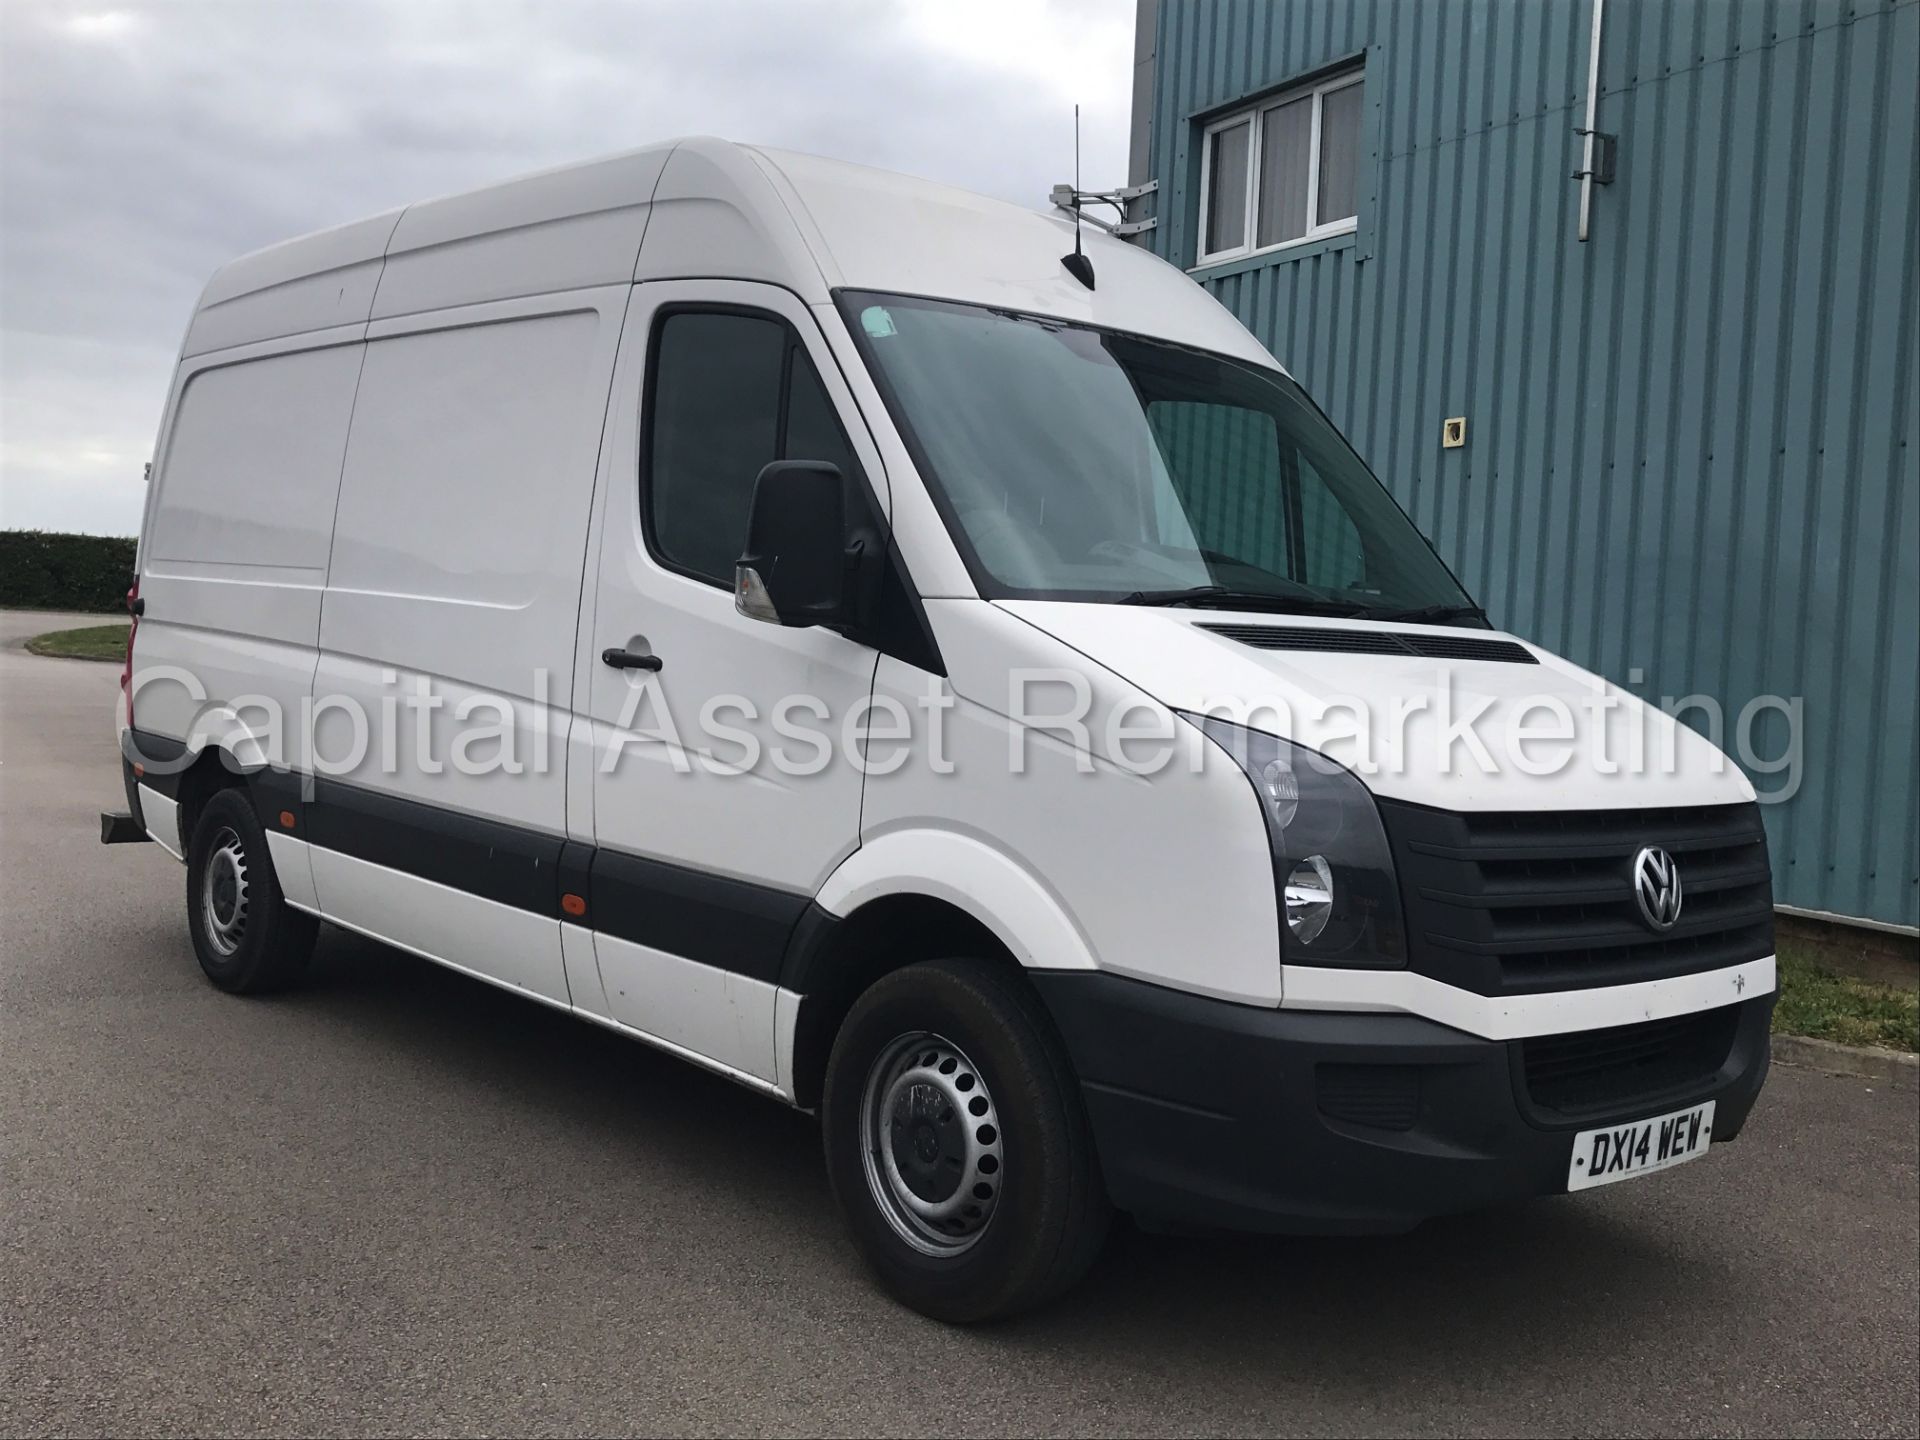 VOLKSWAGEN CRAFTER CR35 'MWB HI-ROOF' (2014) '2.0 TDI - 109 PS - 6 SPEED' *1 COMPANY OWNER FROM NEW* - Image 8 of 19